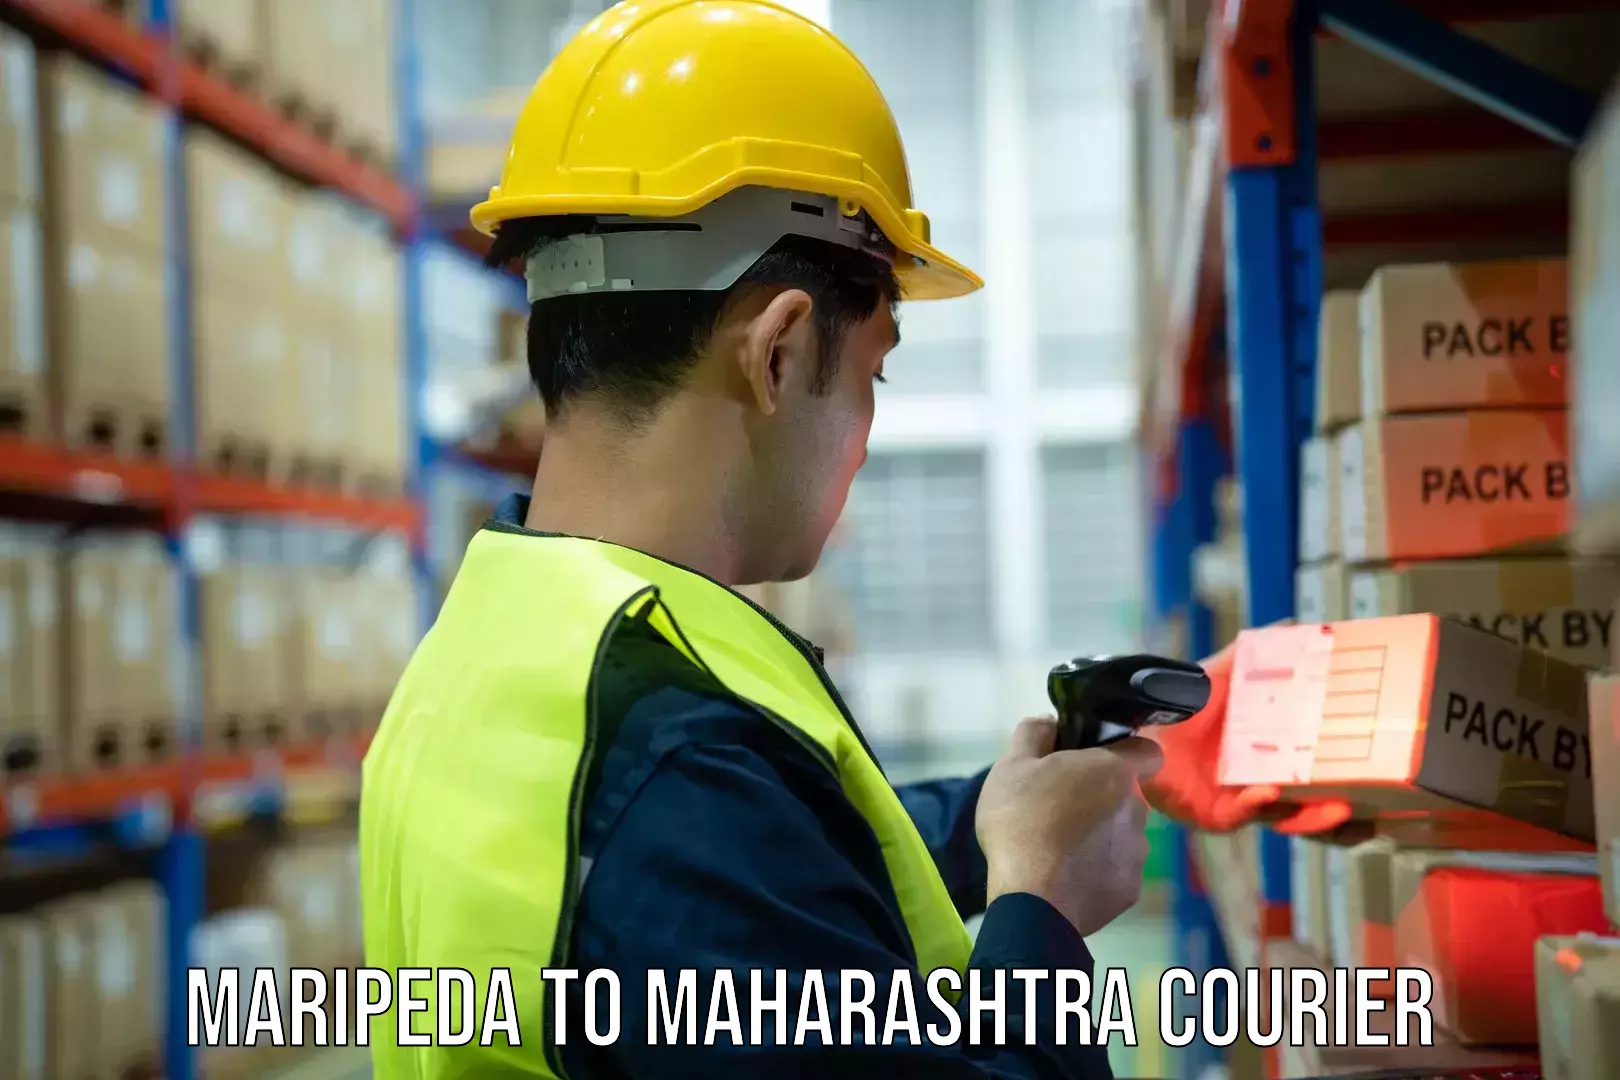 24/7 courier service in Maripeda to DY Patil Vidyapeeth Mumbai